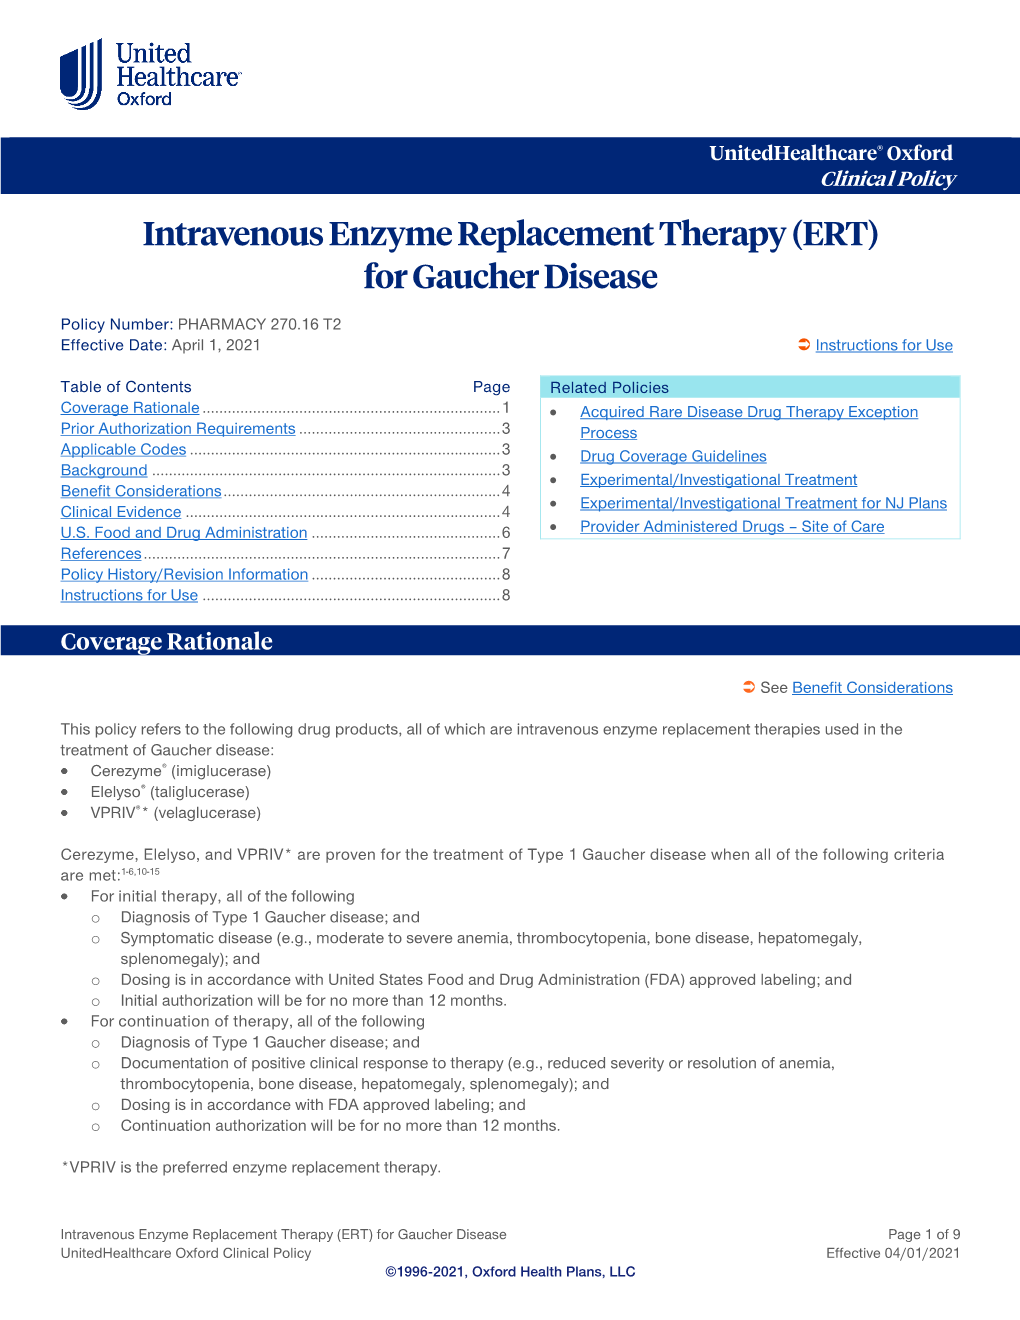 Intravenous Enzyme Replacement Therapy (ERT) for Gaucher Disease